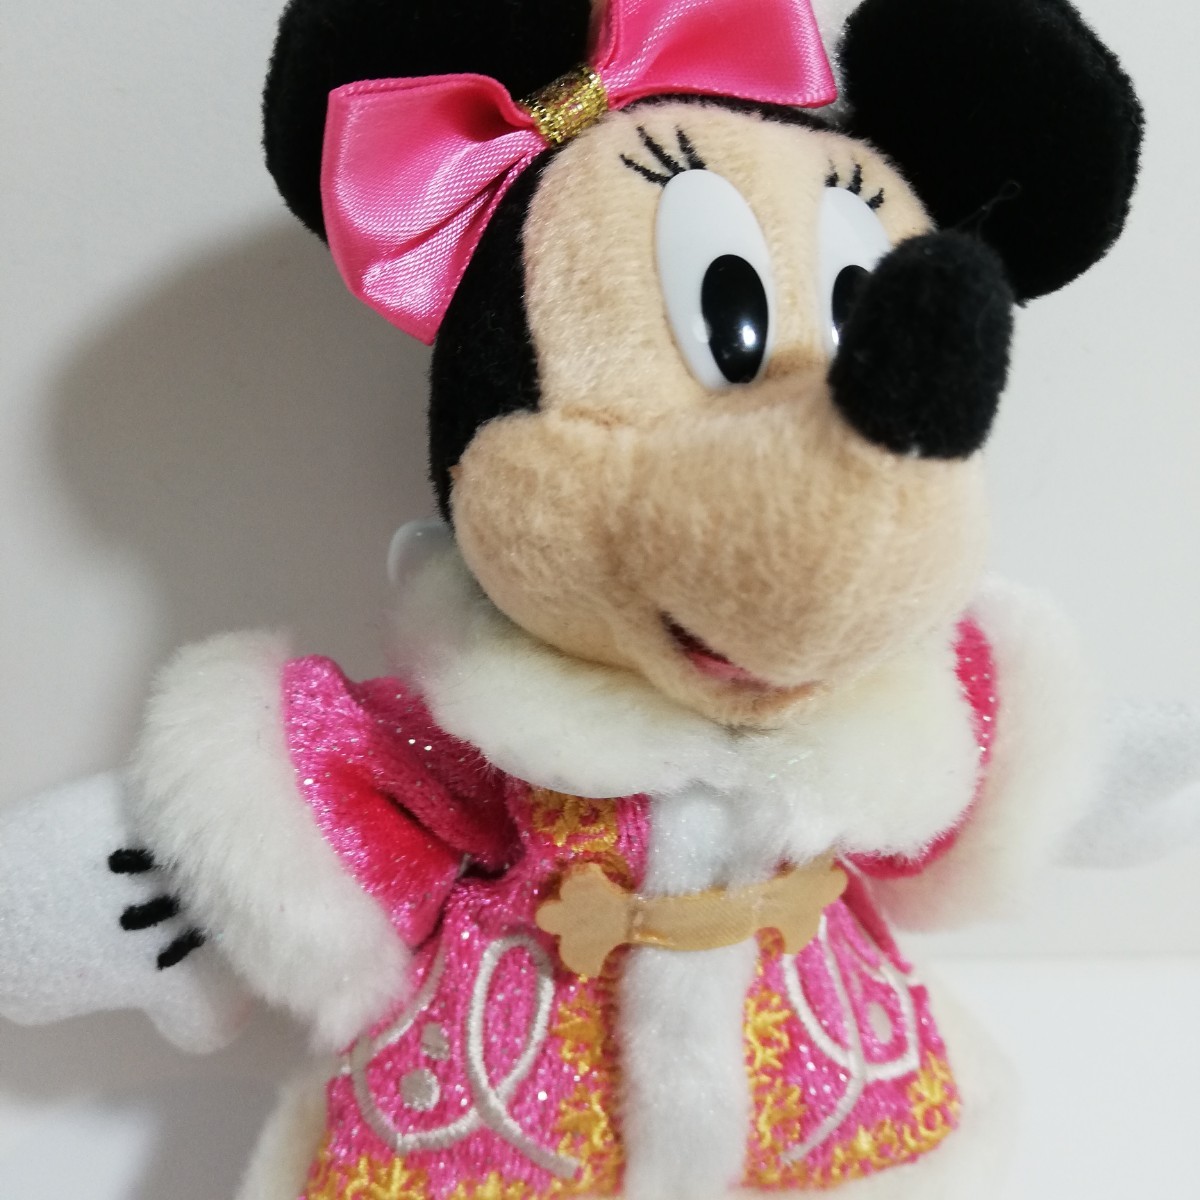  Tokyo Disney si- limitation Christmas * Wish 2014 soft toy Minnie Mouse ( color *ob* Christmas ) soft toy badge minnie 